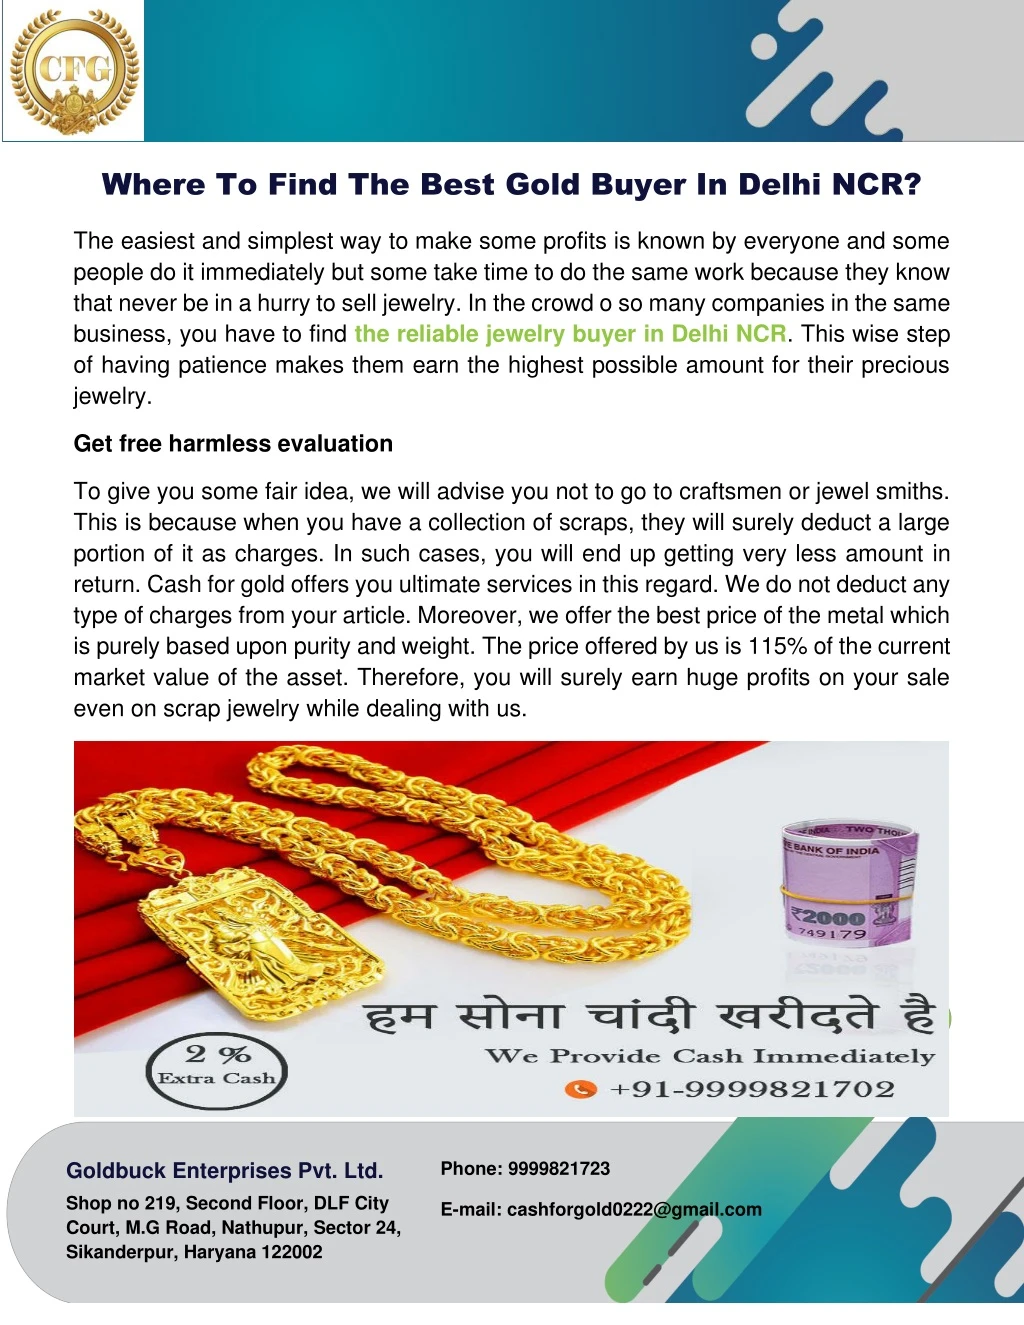 where to find the best gold buyer in delhi ncr